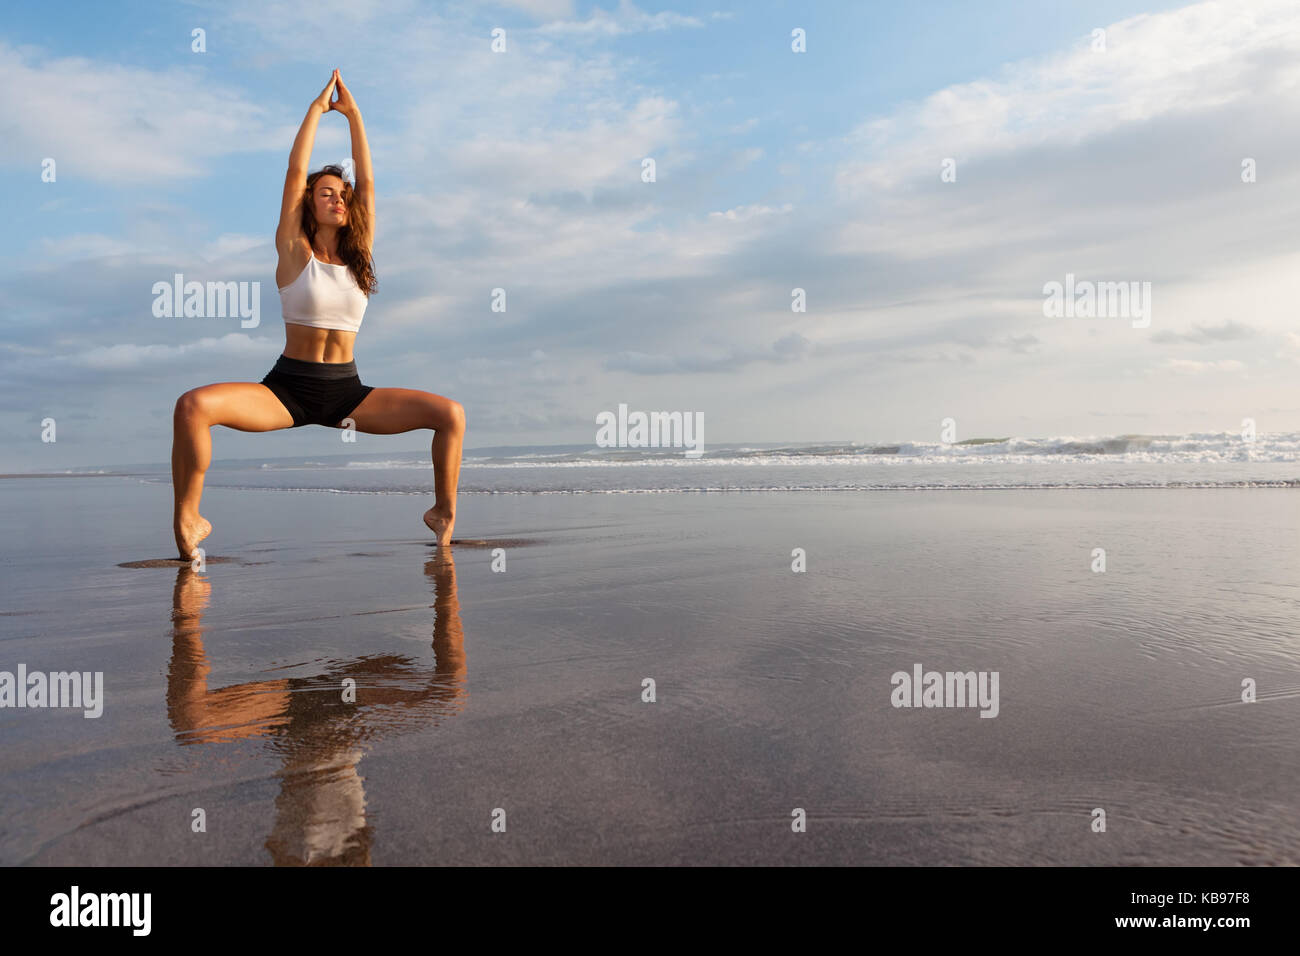 https://c8.alamy.com/comp/KB97F8/meditation-on-sunset-sky-background-young-active-woman-in-yoga-pose-KB97F8.jpg